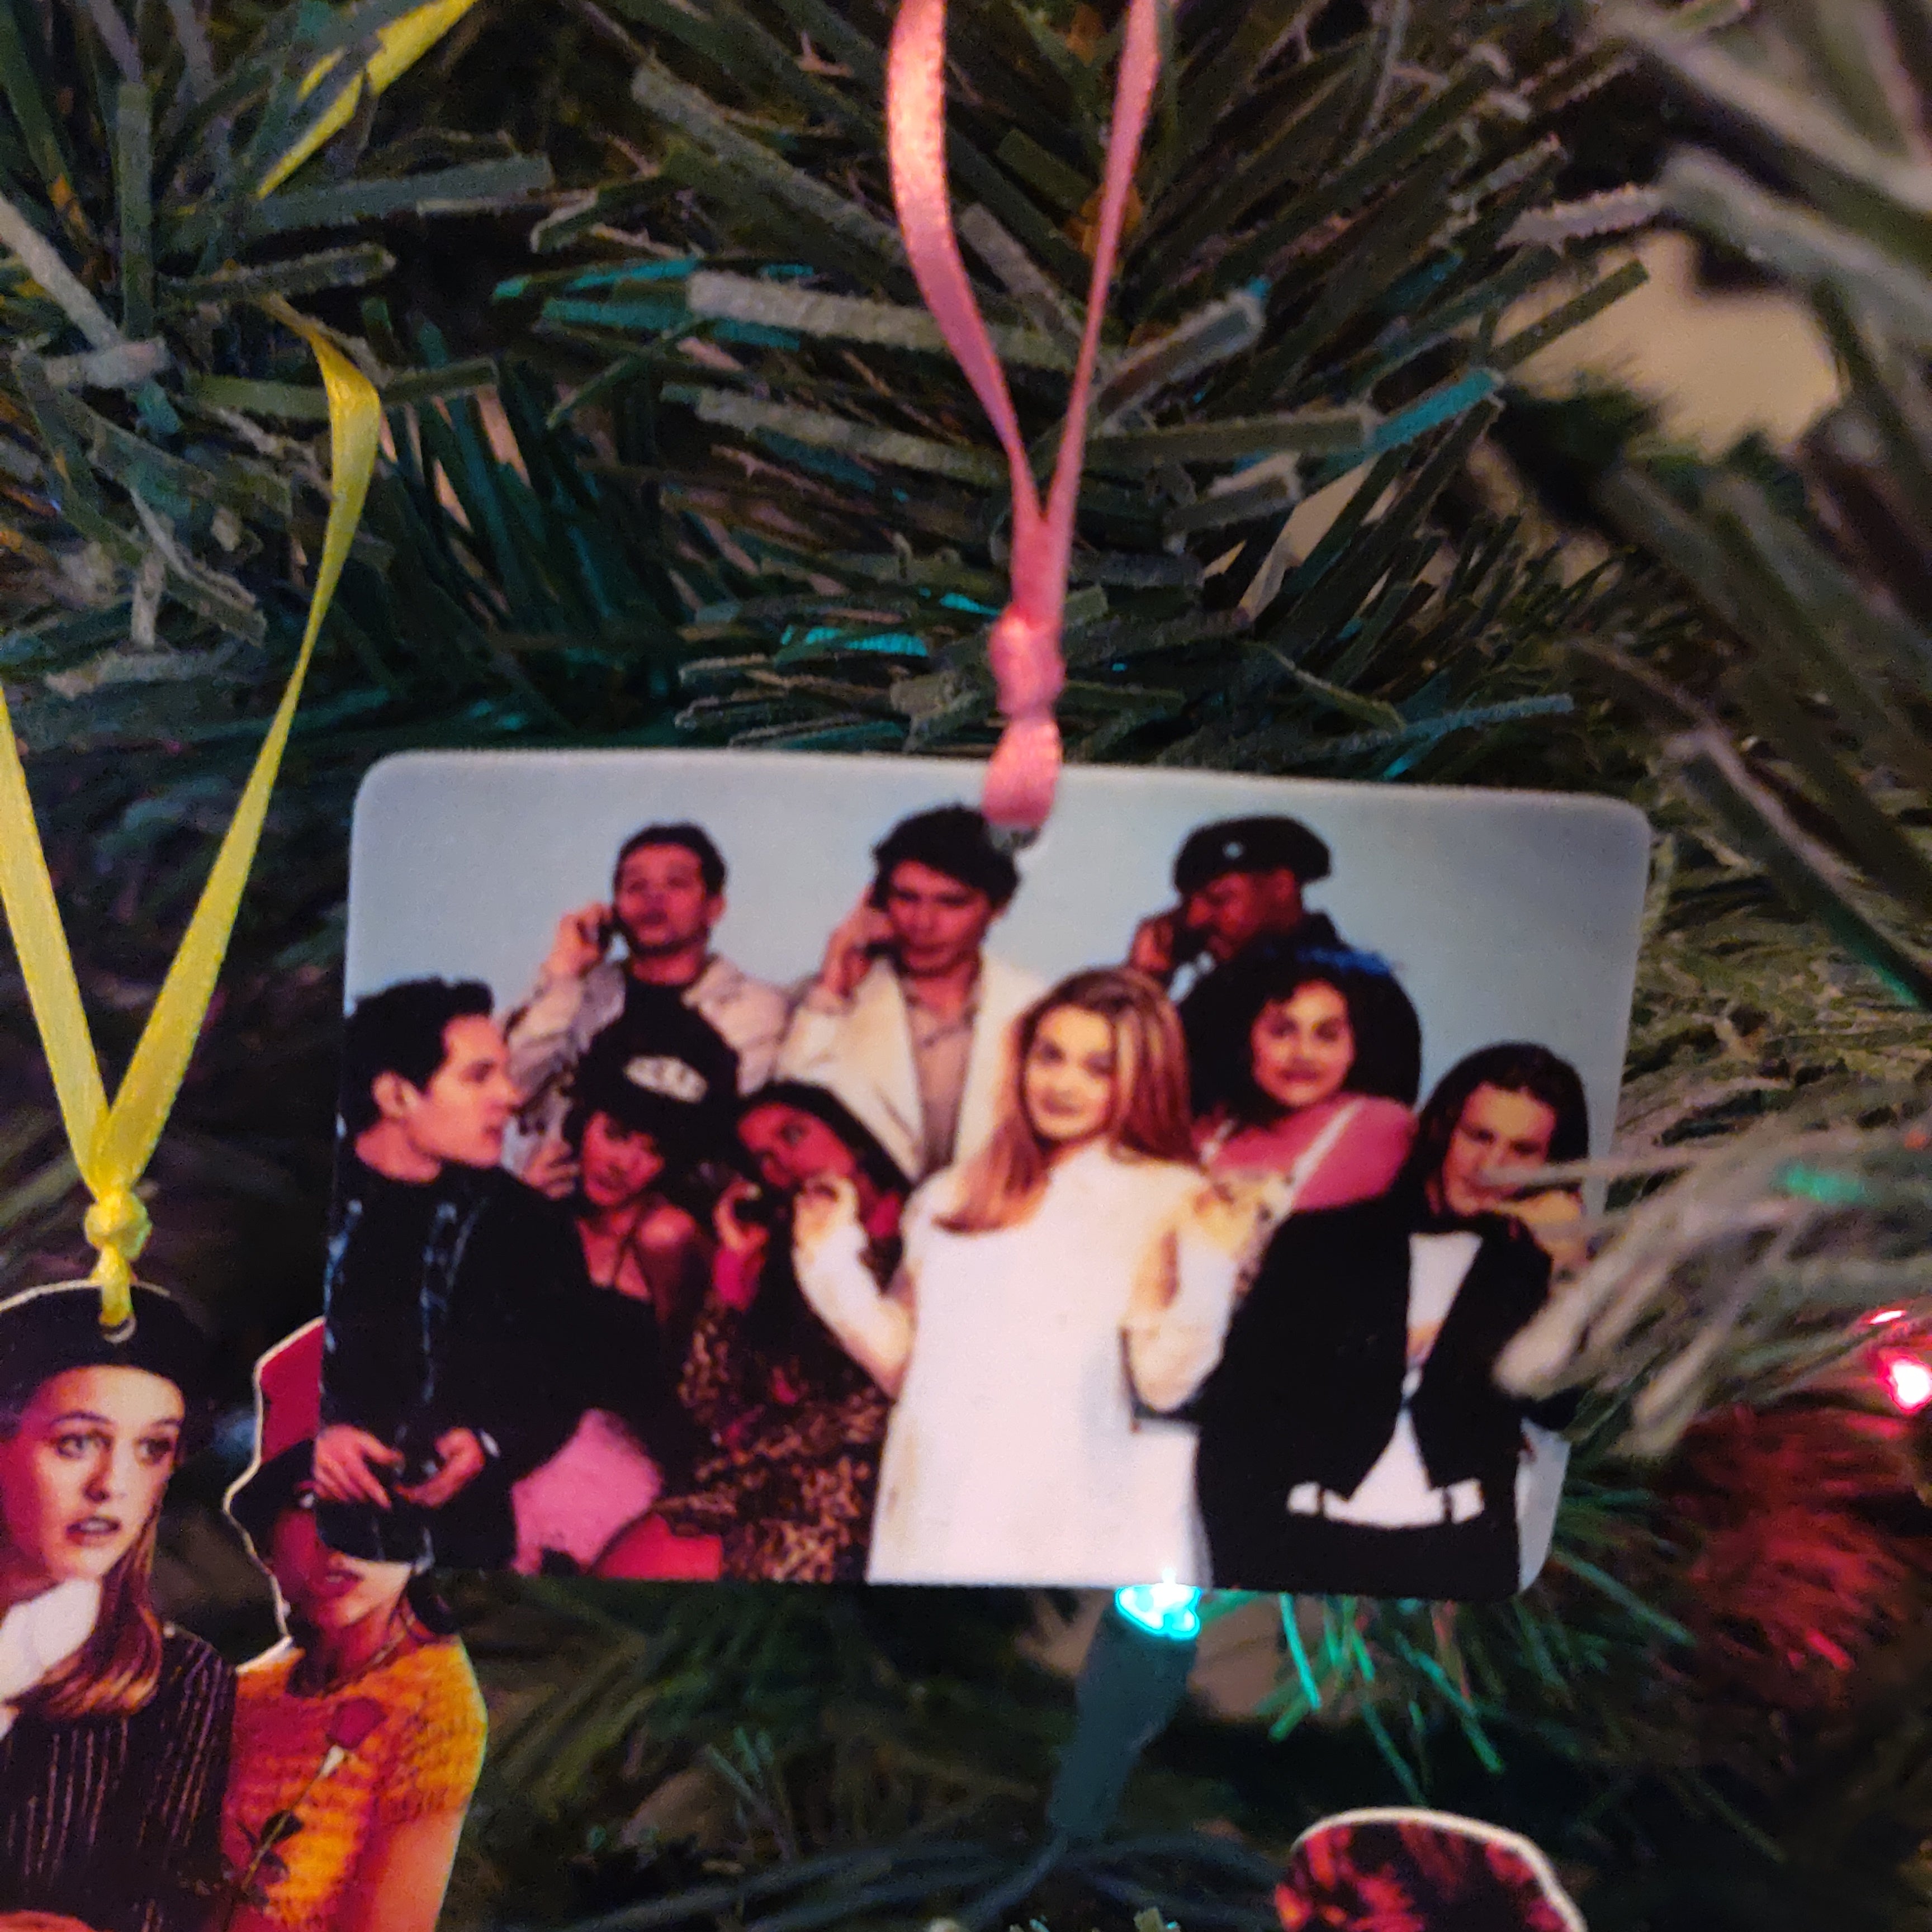 Clueless ORNAMENTS